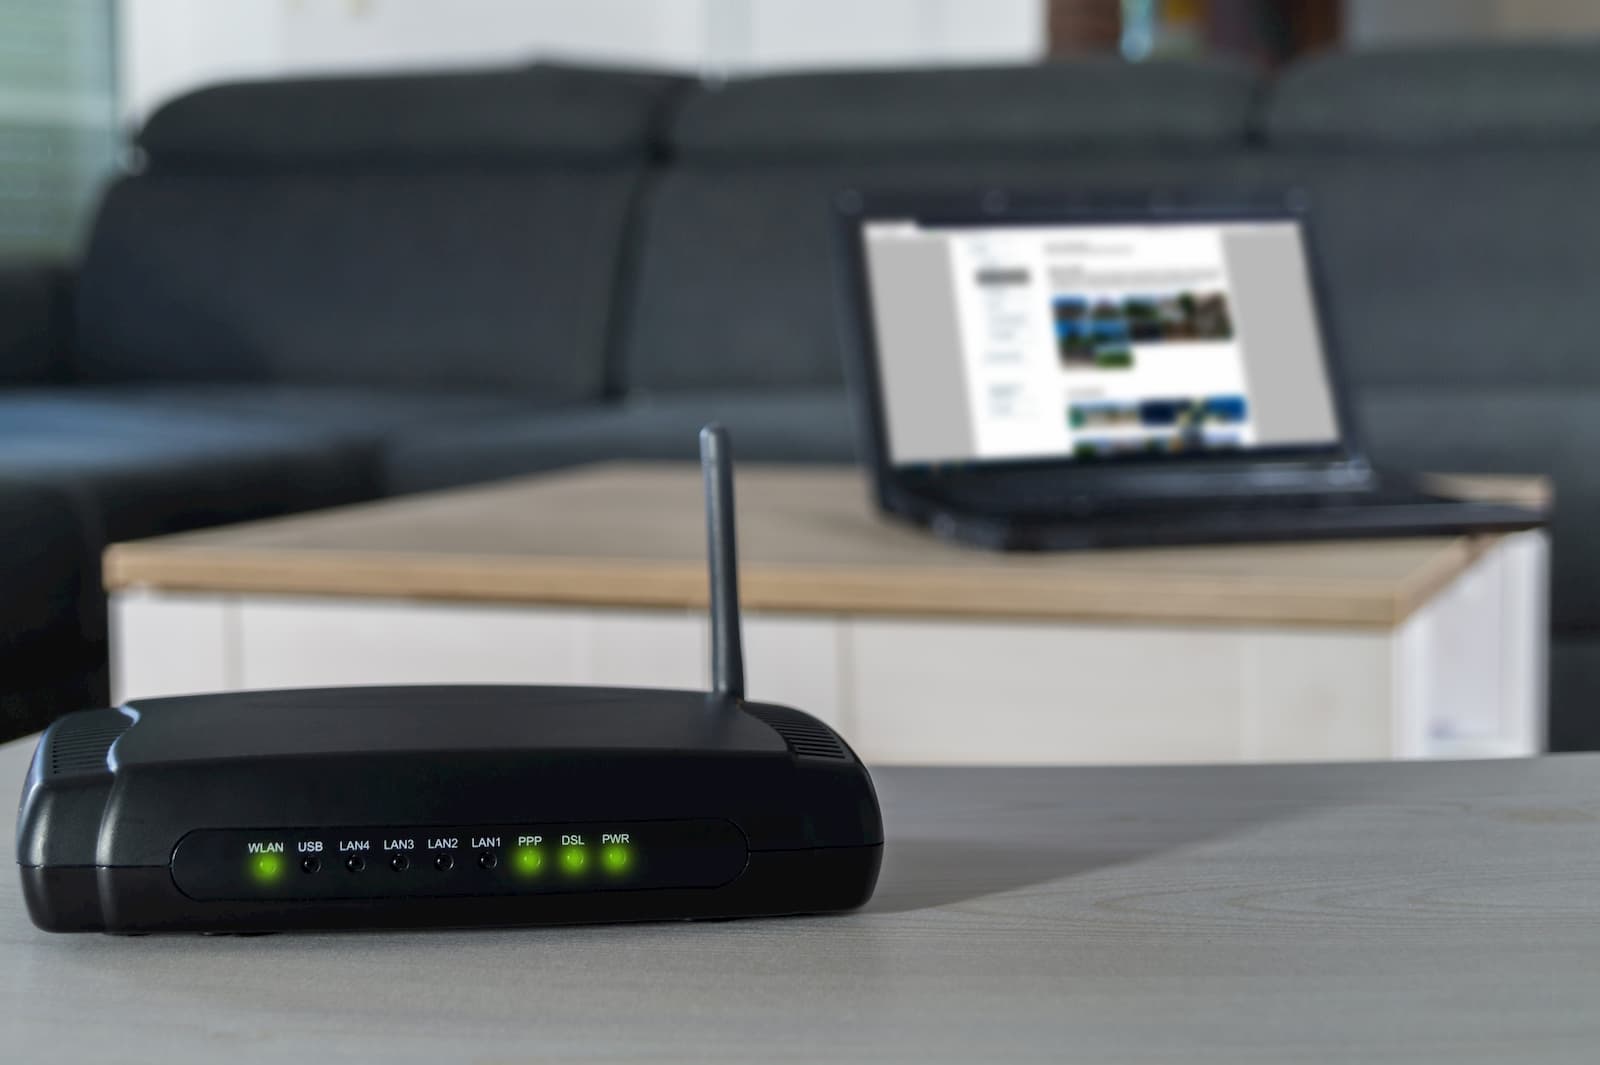 How To Change Channels On A Wi-Fi Router